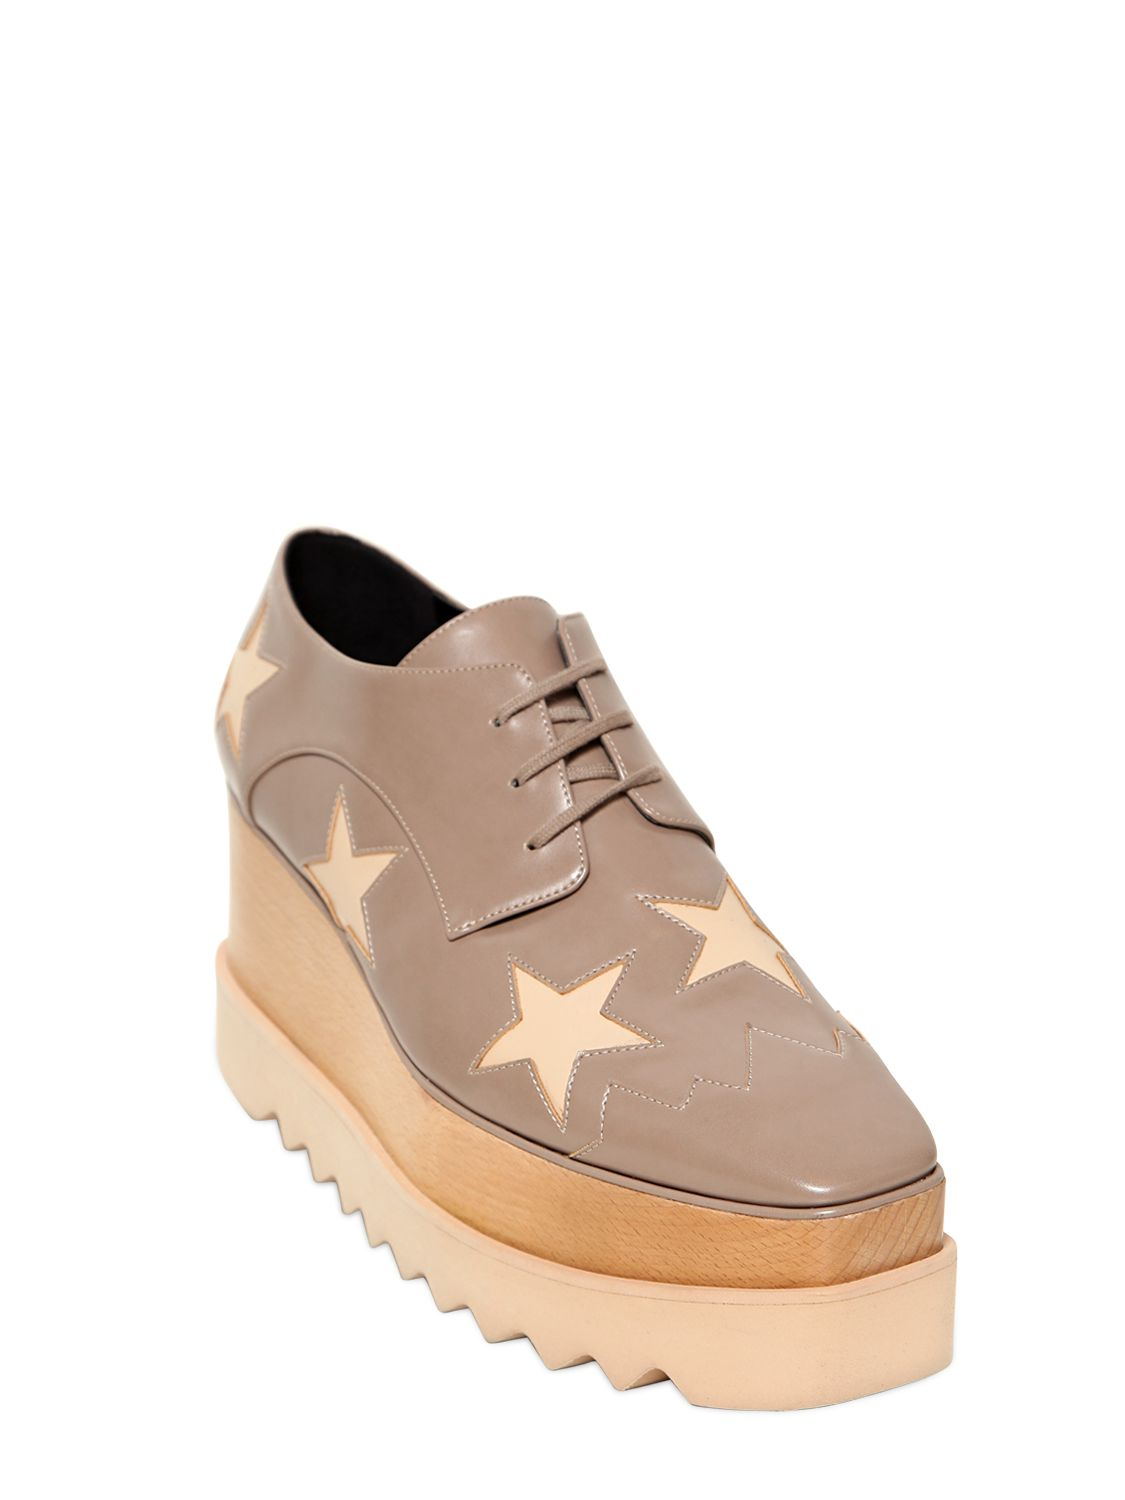 Lyst - Stella McCartney 90mm Stars Alter Nappa Lace Up Shoes in Brown